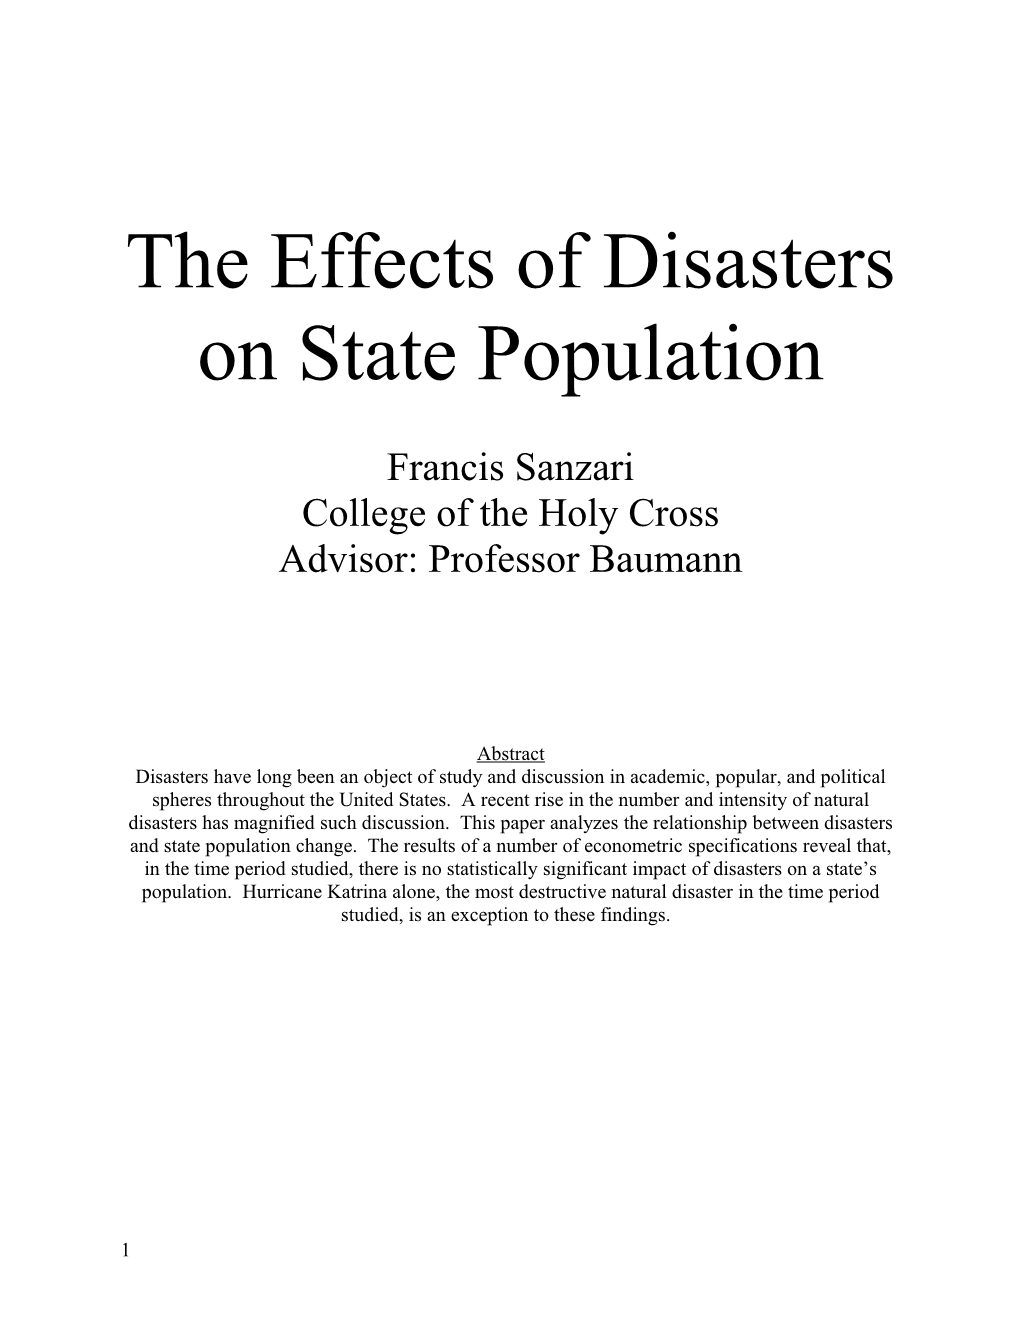 The Effects of Disasters on State Population